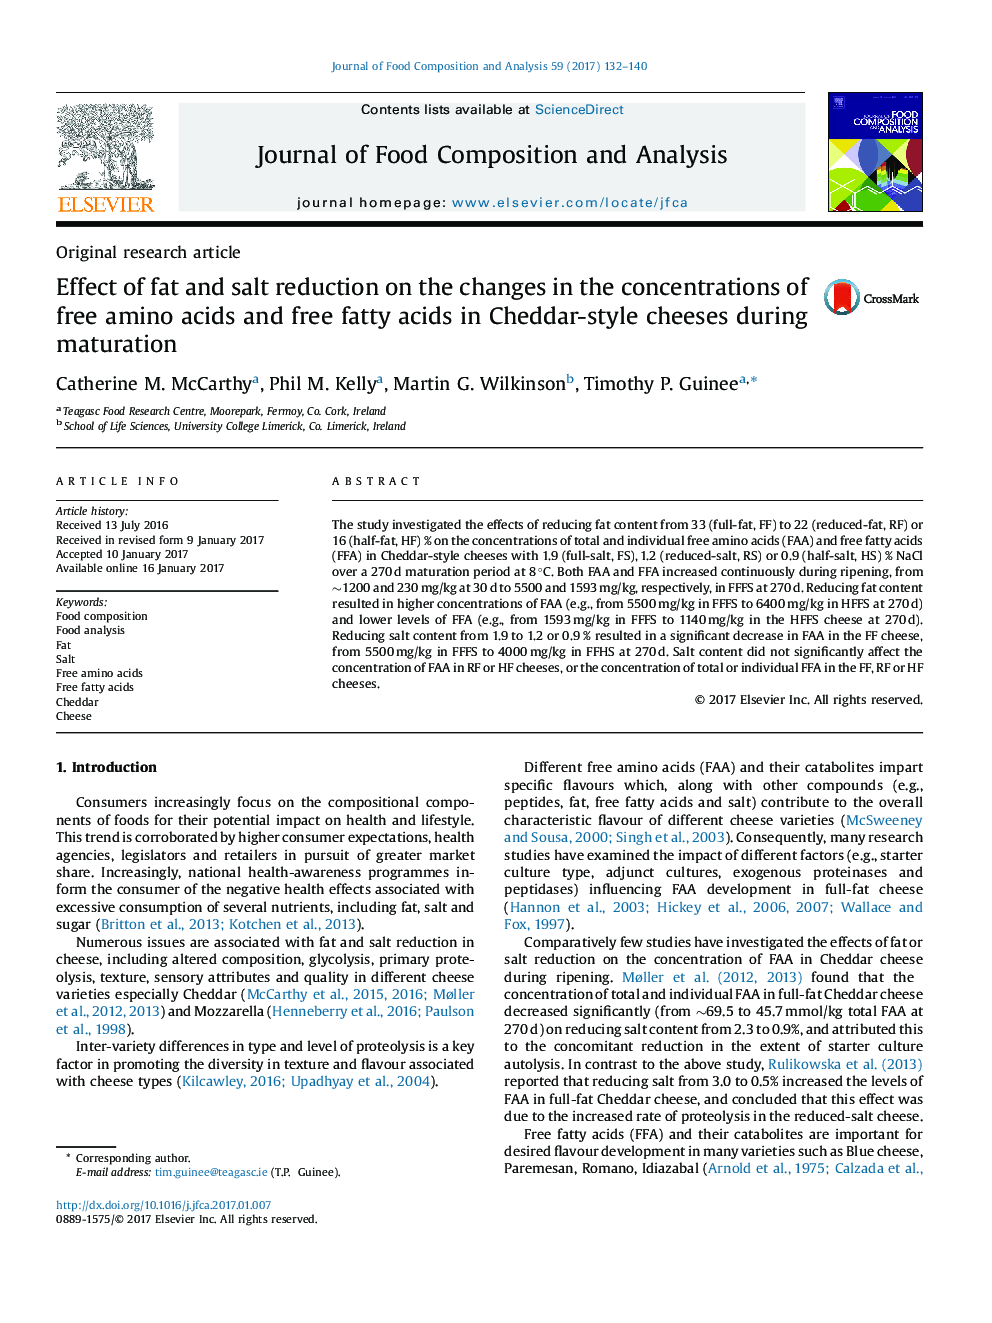 Original research articleEffect of fat and salt reduction on the changes in the concentrations of free amino acids and free fatty acids in Cheddar-style cheeses during maturation